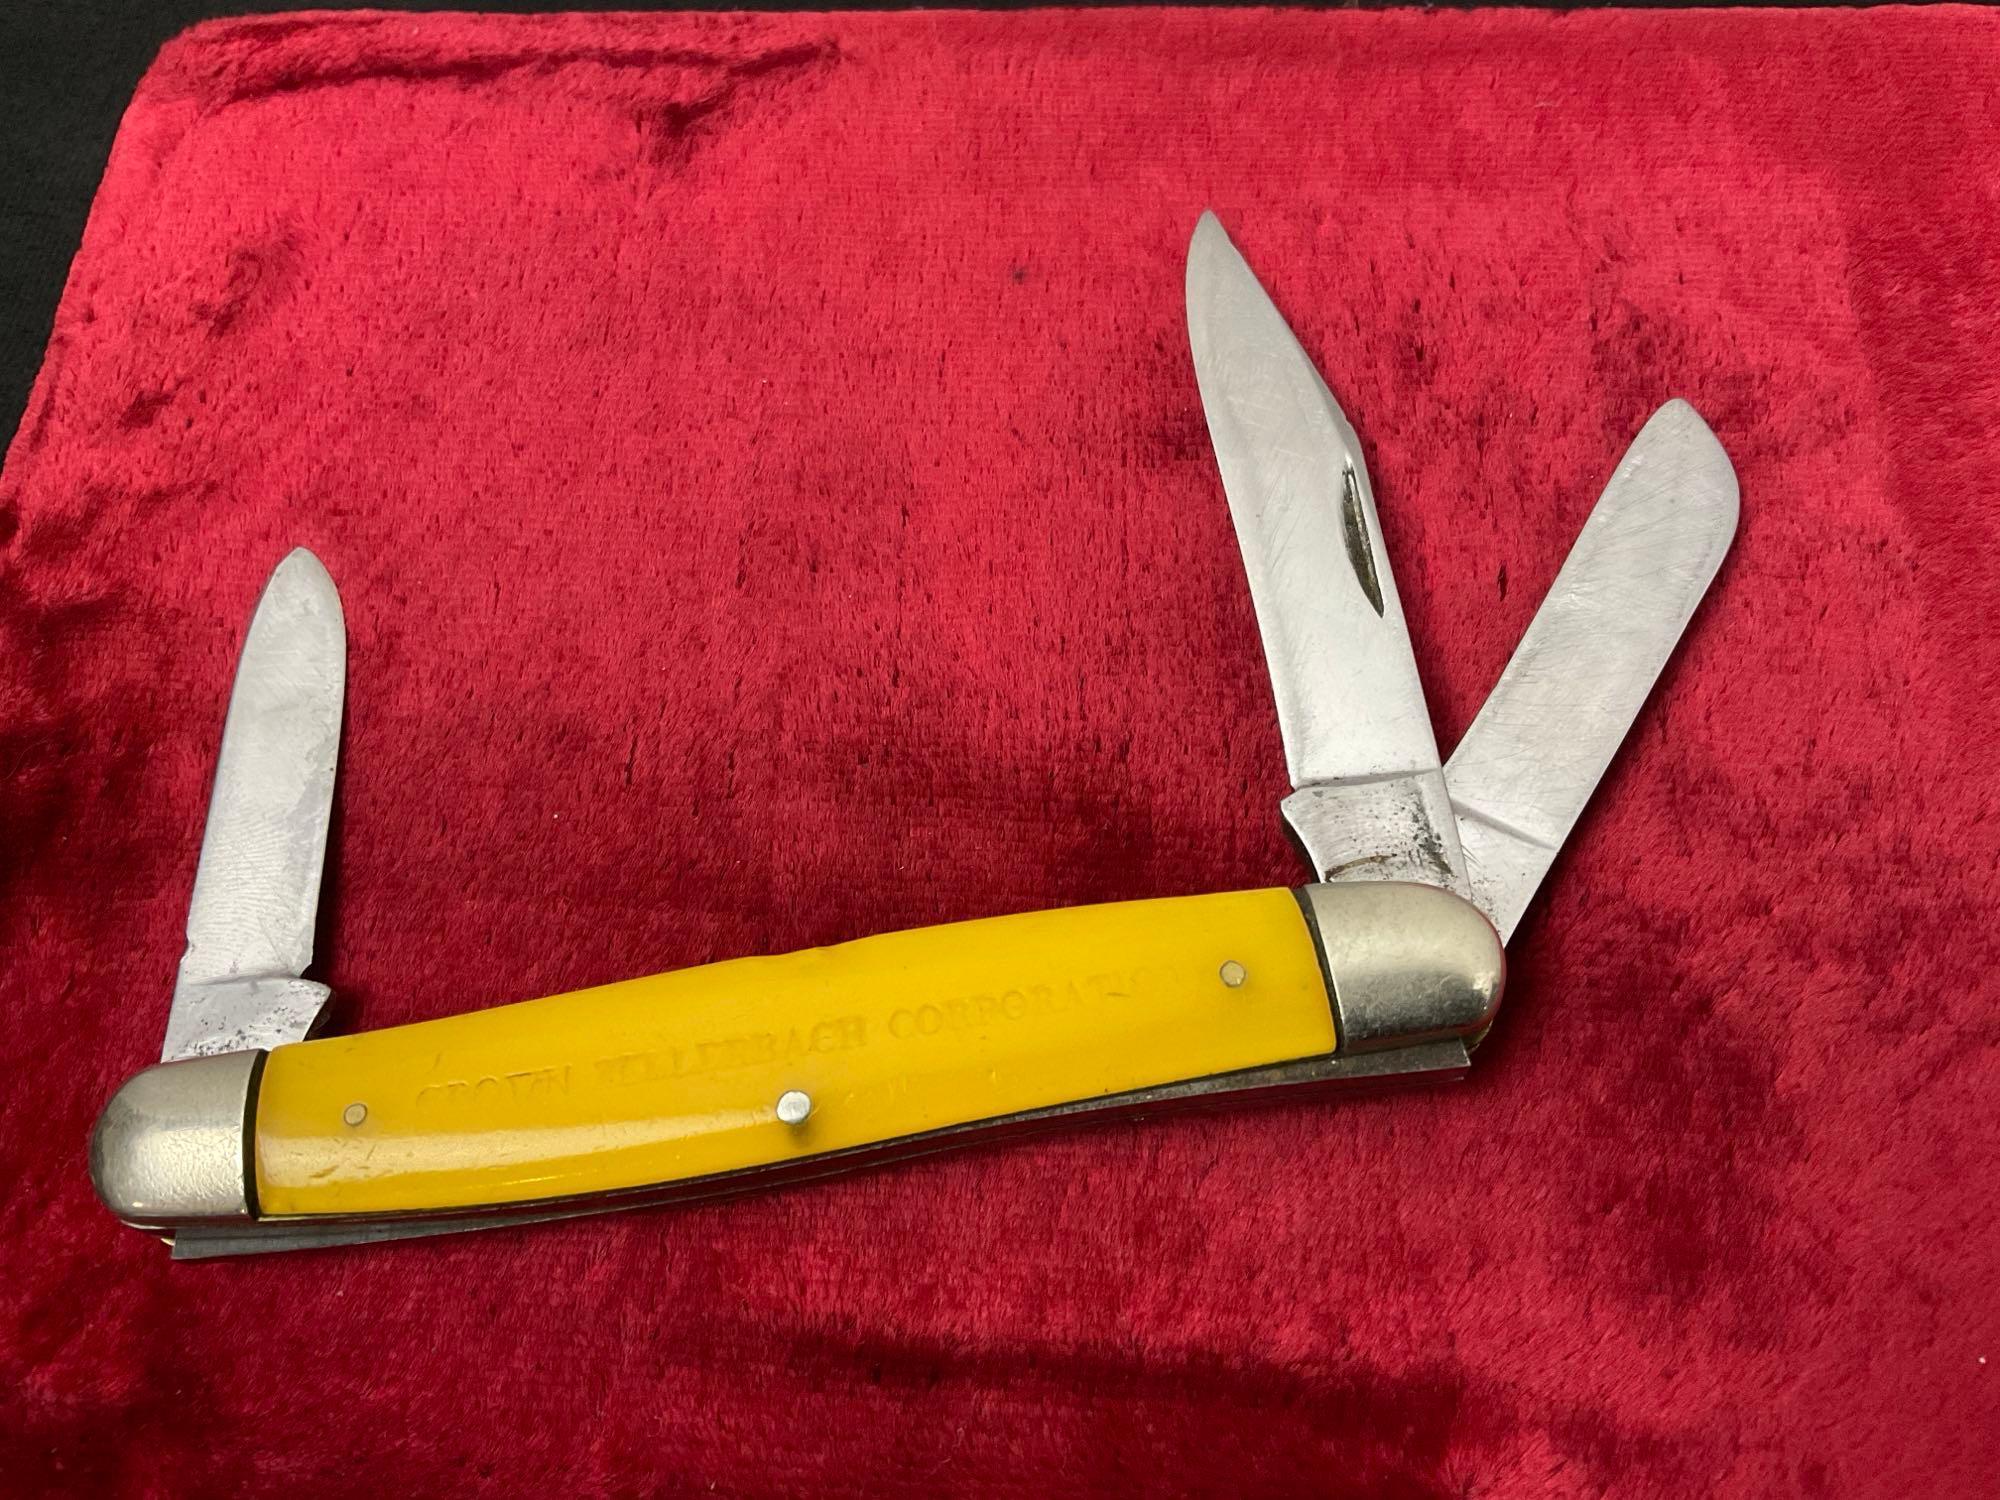 6x Assorted Pocket Knives, Antique Henry Sears Co, Marked Stainless Pakistan, few unmarked pieces